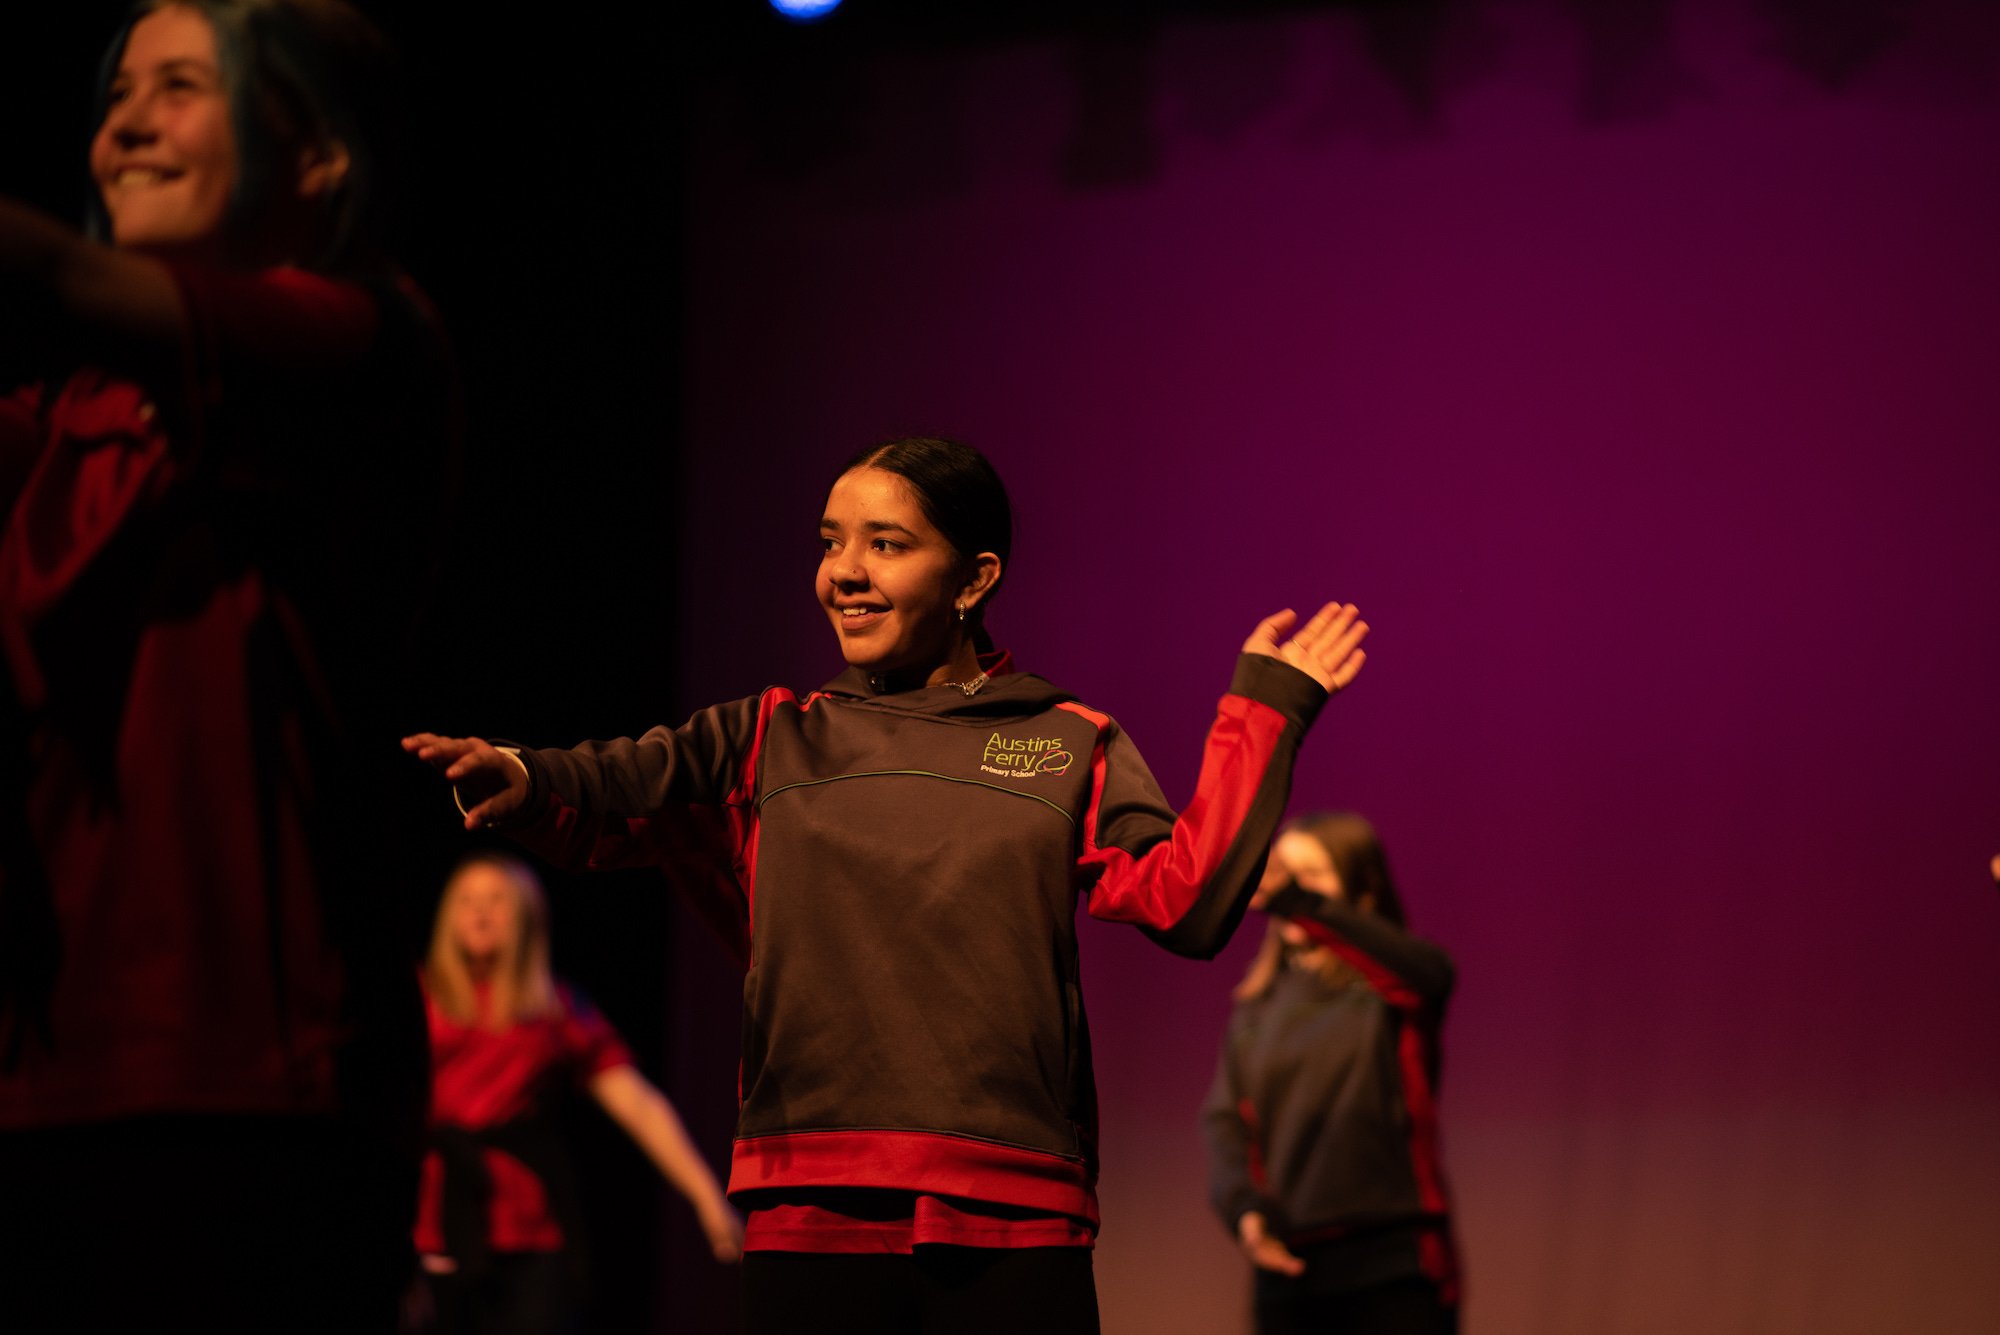  student smiling while dancing on stage 